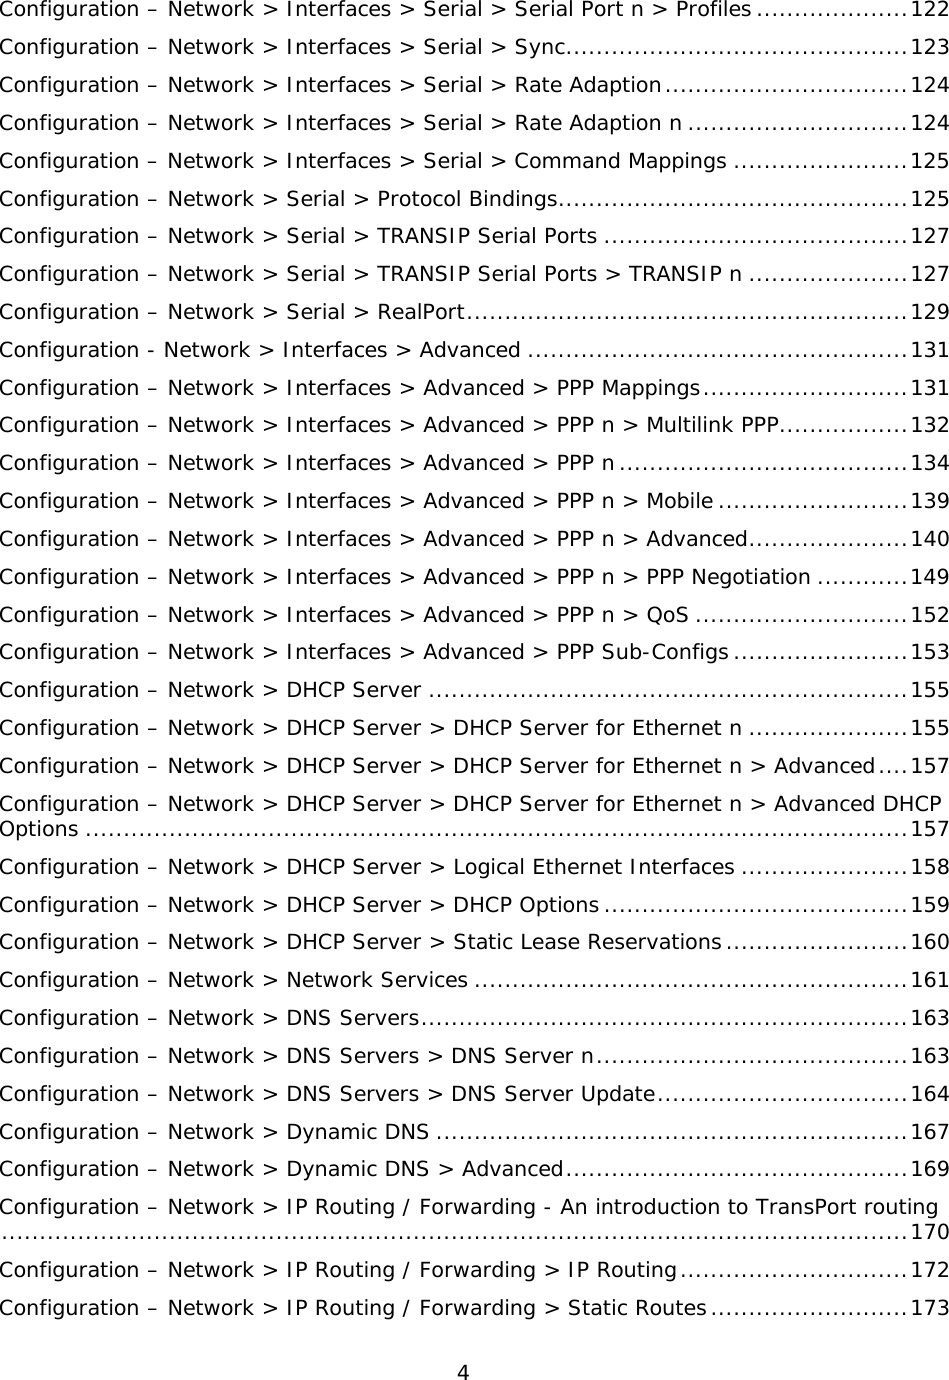 4  Configuration – Network &gt; Interfaces &gt; Serial &gt; Serial Port n &gt; Profiles .................... 122 Configuration – Network &gt; Interfaces &gt; Serial &gt; Sync ............................................. 123 Configuration – Network &gt; Interfaces &gt; Serial &gt; Rate Adaption ................................ 124 Configuration – Network &gt; Interfaces &gt; Serial &gt; Rate Adaption n ............................. 124 Configuration – Network &gt; Interfaces &gt; Serial &gt; Command Mappings ....................... 125 Configuration – Network &gt; Serial &gt; Protocol Bindings .............................................. 125 Configuration – Network &gt; Serial &gt; TRANSIP Serial Ports ........................................ 127 Configuration – Network &gt; Serial &gt; TRANSIP Serial Ports &gt; TRANSIP n ..................... 127 Configuration – Network &gt; Serial &gt; RealPort .......................................................... 129 Configuration - Network &gt; Interfaces &gt; Advanced .................................................. 131 Configuration – Network &gt; Interfaces &gt; Advanced &gt; PPP Mappings ........................... 131 Configuration – Network &gt; Interfaces &gt; Advanced &gt; PPP n &gt; Multilink PPP ................. 132 Configuration – Network &gt; Interfaces &gt; Advanced &gt; PPP n ...................................... 134 Configuration – Network &gt; Interfaces &gt; Advanced &gt; PPP n &gt; Mobile ......................... 139 Configuration – Network &gt; Interfaces &gt; Advanced &gt; PPP n &gt; Advanced ..................... 140 Configuration – Network &gt; Interfaces &gt; Advanced &gt; PPP n &gt; PPP Negotiation ............ 149 Configuration – Network &gt; Interfaces &gt; Advanced &gt; PPP n &gt; QoS ............................ 152 Configuration – Network &gt; Interfaces &gt; Advanced &gt; PPP Sub-Configs ....................... 153 Configuration – Network &gt; DHCP Server ............................................................... 155 Configuration – Network &gt; DHCP Server &gt; DHCP Server for Ethernet n ..................... 155 Configuration – Network &gt; DHCP Server &gt; DHCP Server for Ethernet n &gt; Advanced .... 157 Configuration – Network &gt; DHCP Server &gt; DHCP Server for Ethernet n &gt; Advanced DHCP Options ............................................................................................................ 157 Configuration – Network &gt; DHCP Server &gt; Logical Ethernet Interfaces ...................... 158 Configuration – Network &gt; DHCP Server &gt; DHCP Options ........................................ 159 Configuration – Network &gt; DHCP Server &gt; Static Lease Reservations ........................ 160 Configuration – Network &gt; Network Services ......................................................... 161 Configuration – Network &gt; DNS Servers ................................................................ 163 Configuration – Network &gt; DNS Servers &gt; DNS Server n ......................................... 163 Configuration – Network &gt; DNS Servers &gt; DNS Server Update ................................. 164 Configuration – Network &gt; Dynamic DNS .............................................................. 167 Configuration – Network &gt; Dynamic DNS &gt; Advanced ............................................. 169 Configuration – Network &gt; IP Routing / Forwarding - An introduction to TransPort routing ....................................................................................................................... 170 Configuration – Network &gt; IP Routing / Forwarding &gt; IP Routing .............................. 172 Configuration – Network &gt; IP Routing / Forwarding &gt; Static Routes .......................... 173 